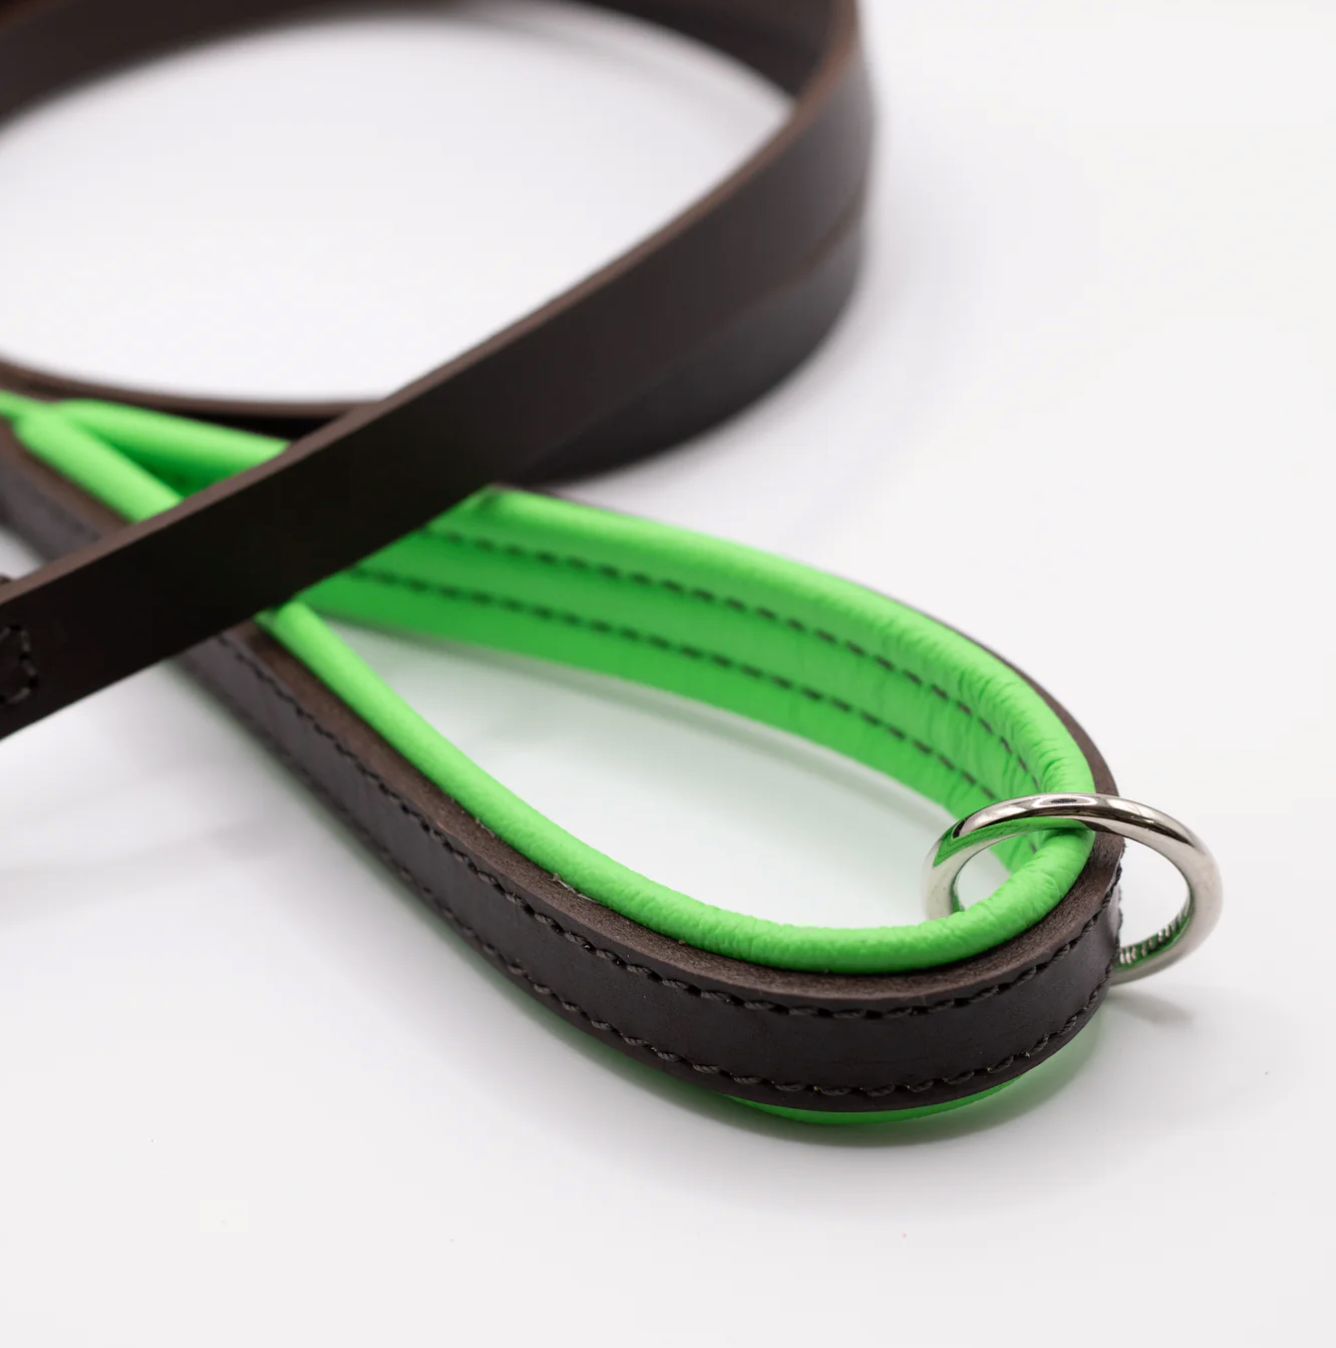 Padded Leather Dog Lead Brown and Green